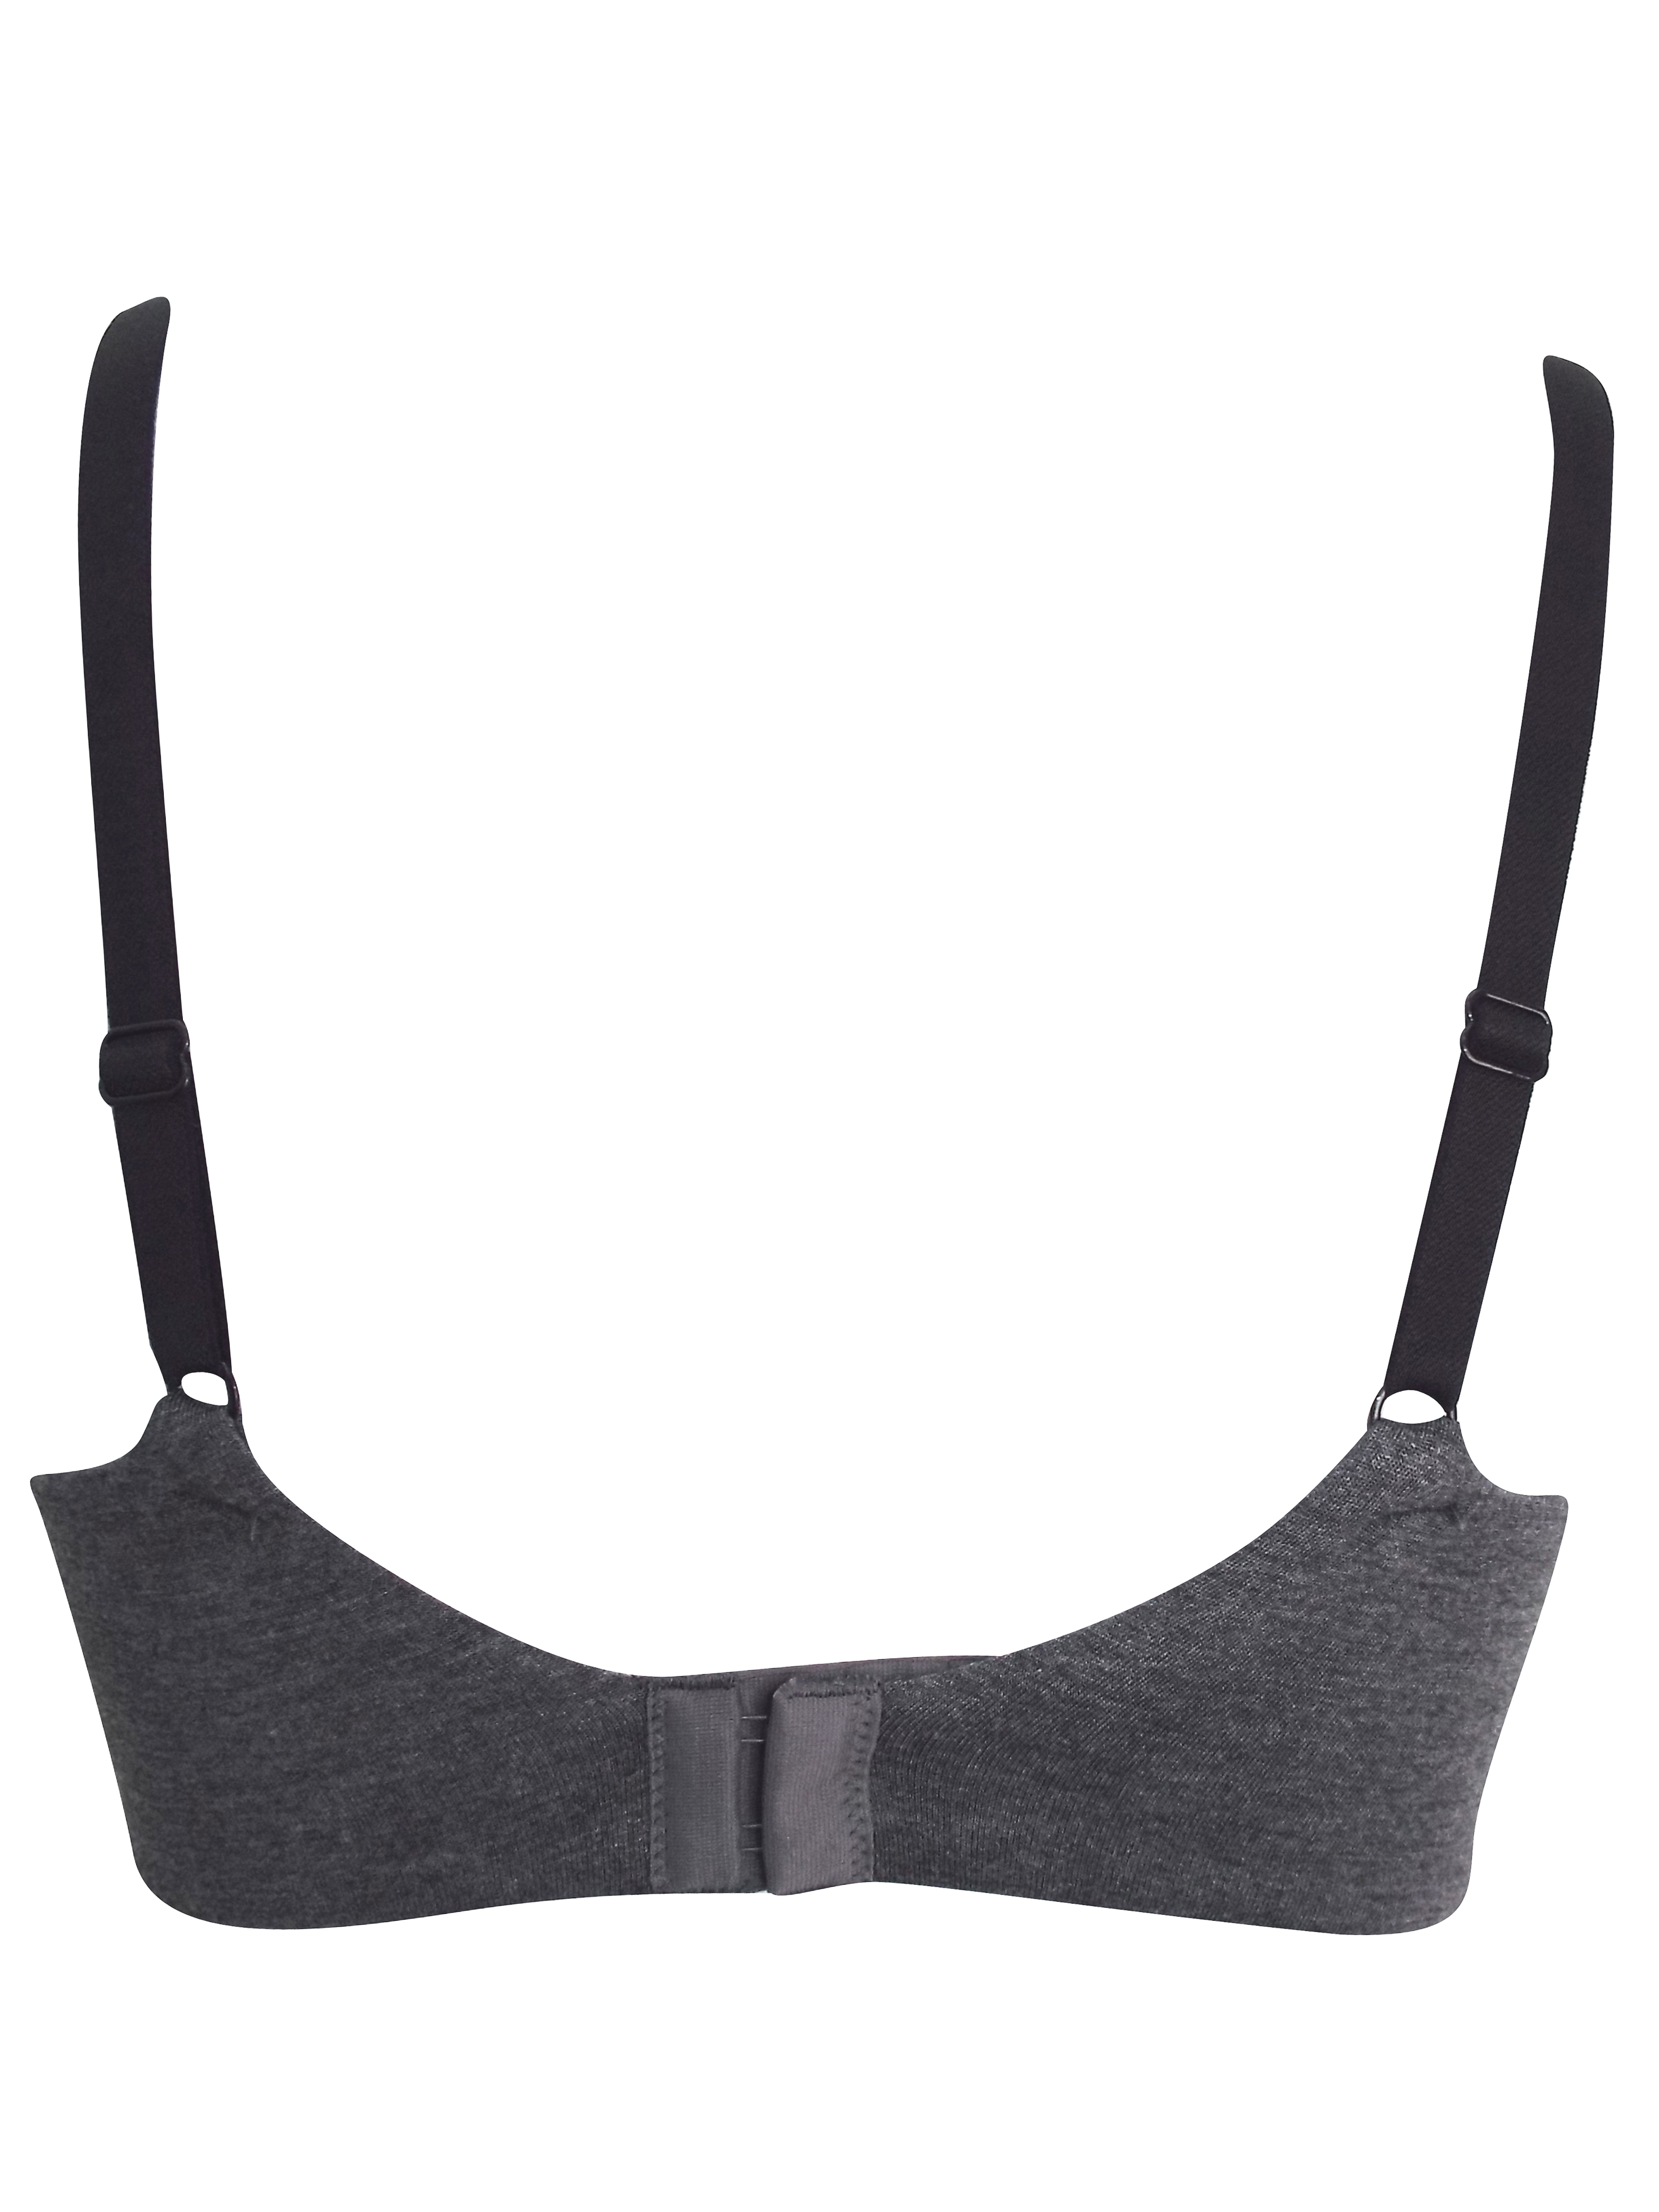 F&F - - F&F GREY Lace Trim Smoothing Moulded Full Cup Bra - Size 34 to ...